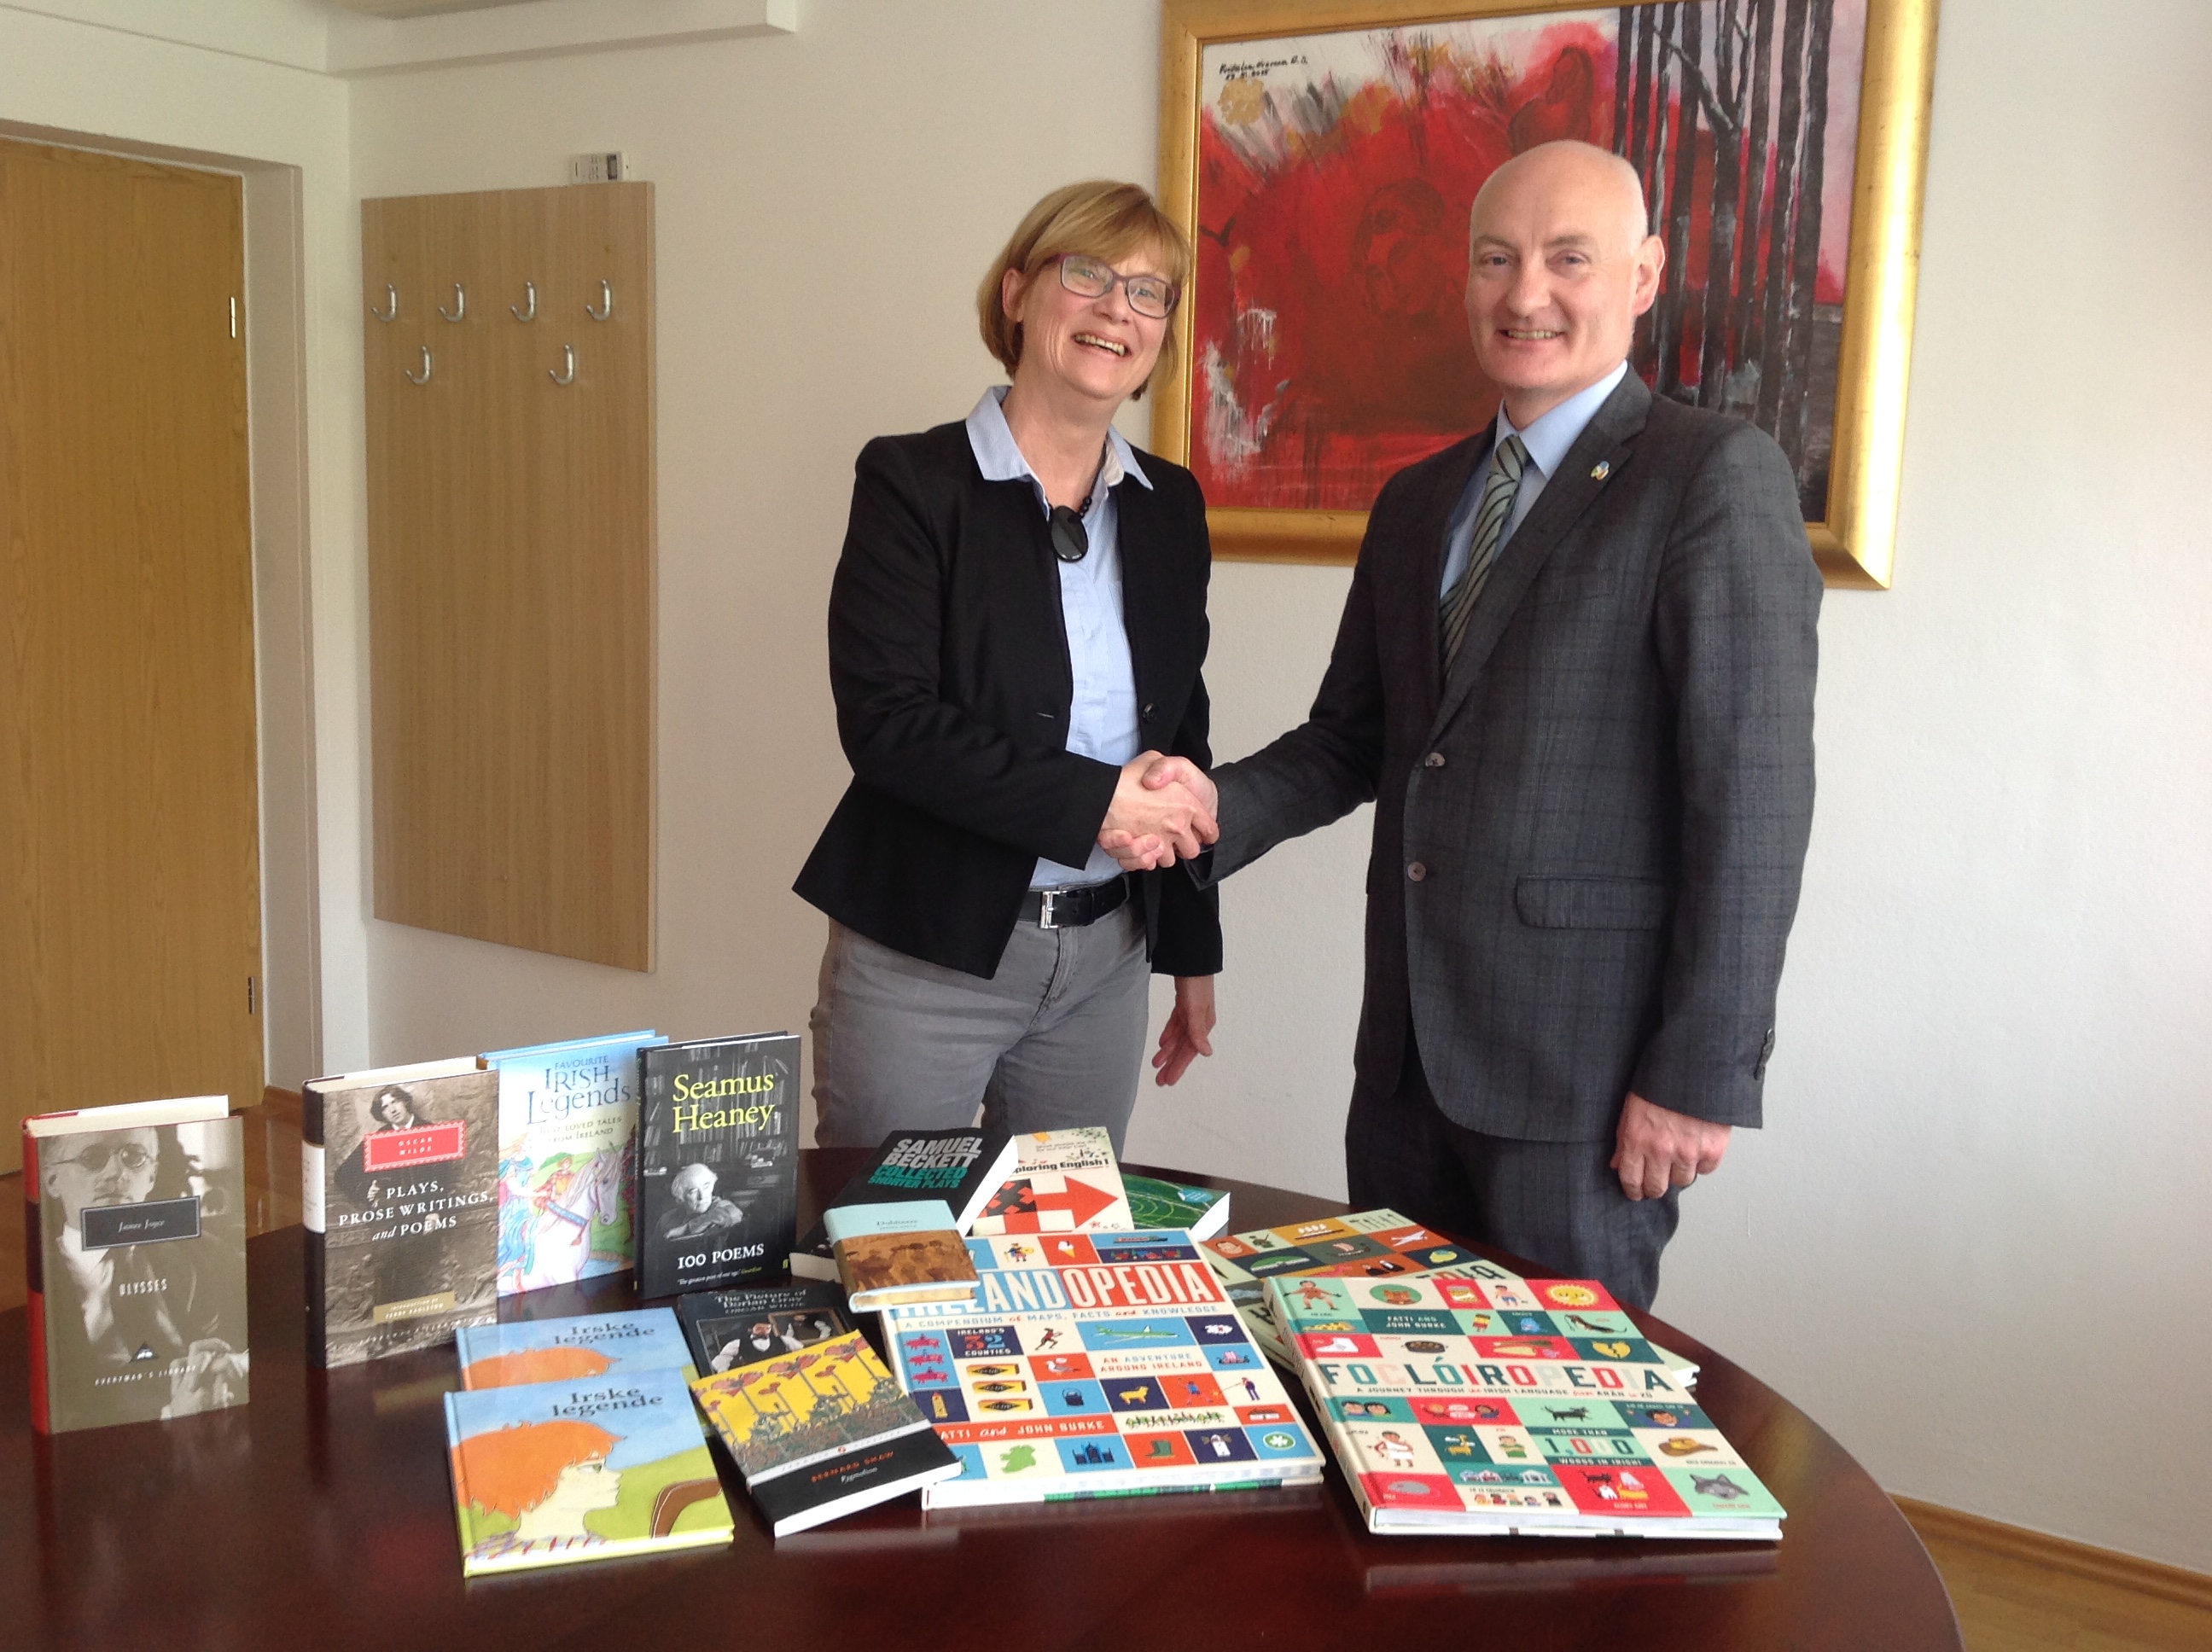 Sections dedicated to Ireland established in a number of city libraries in Slovenia and BiH